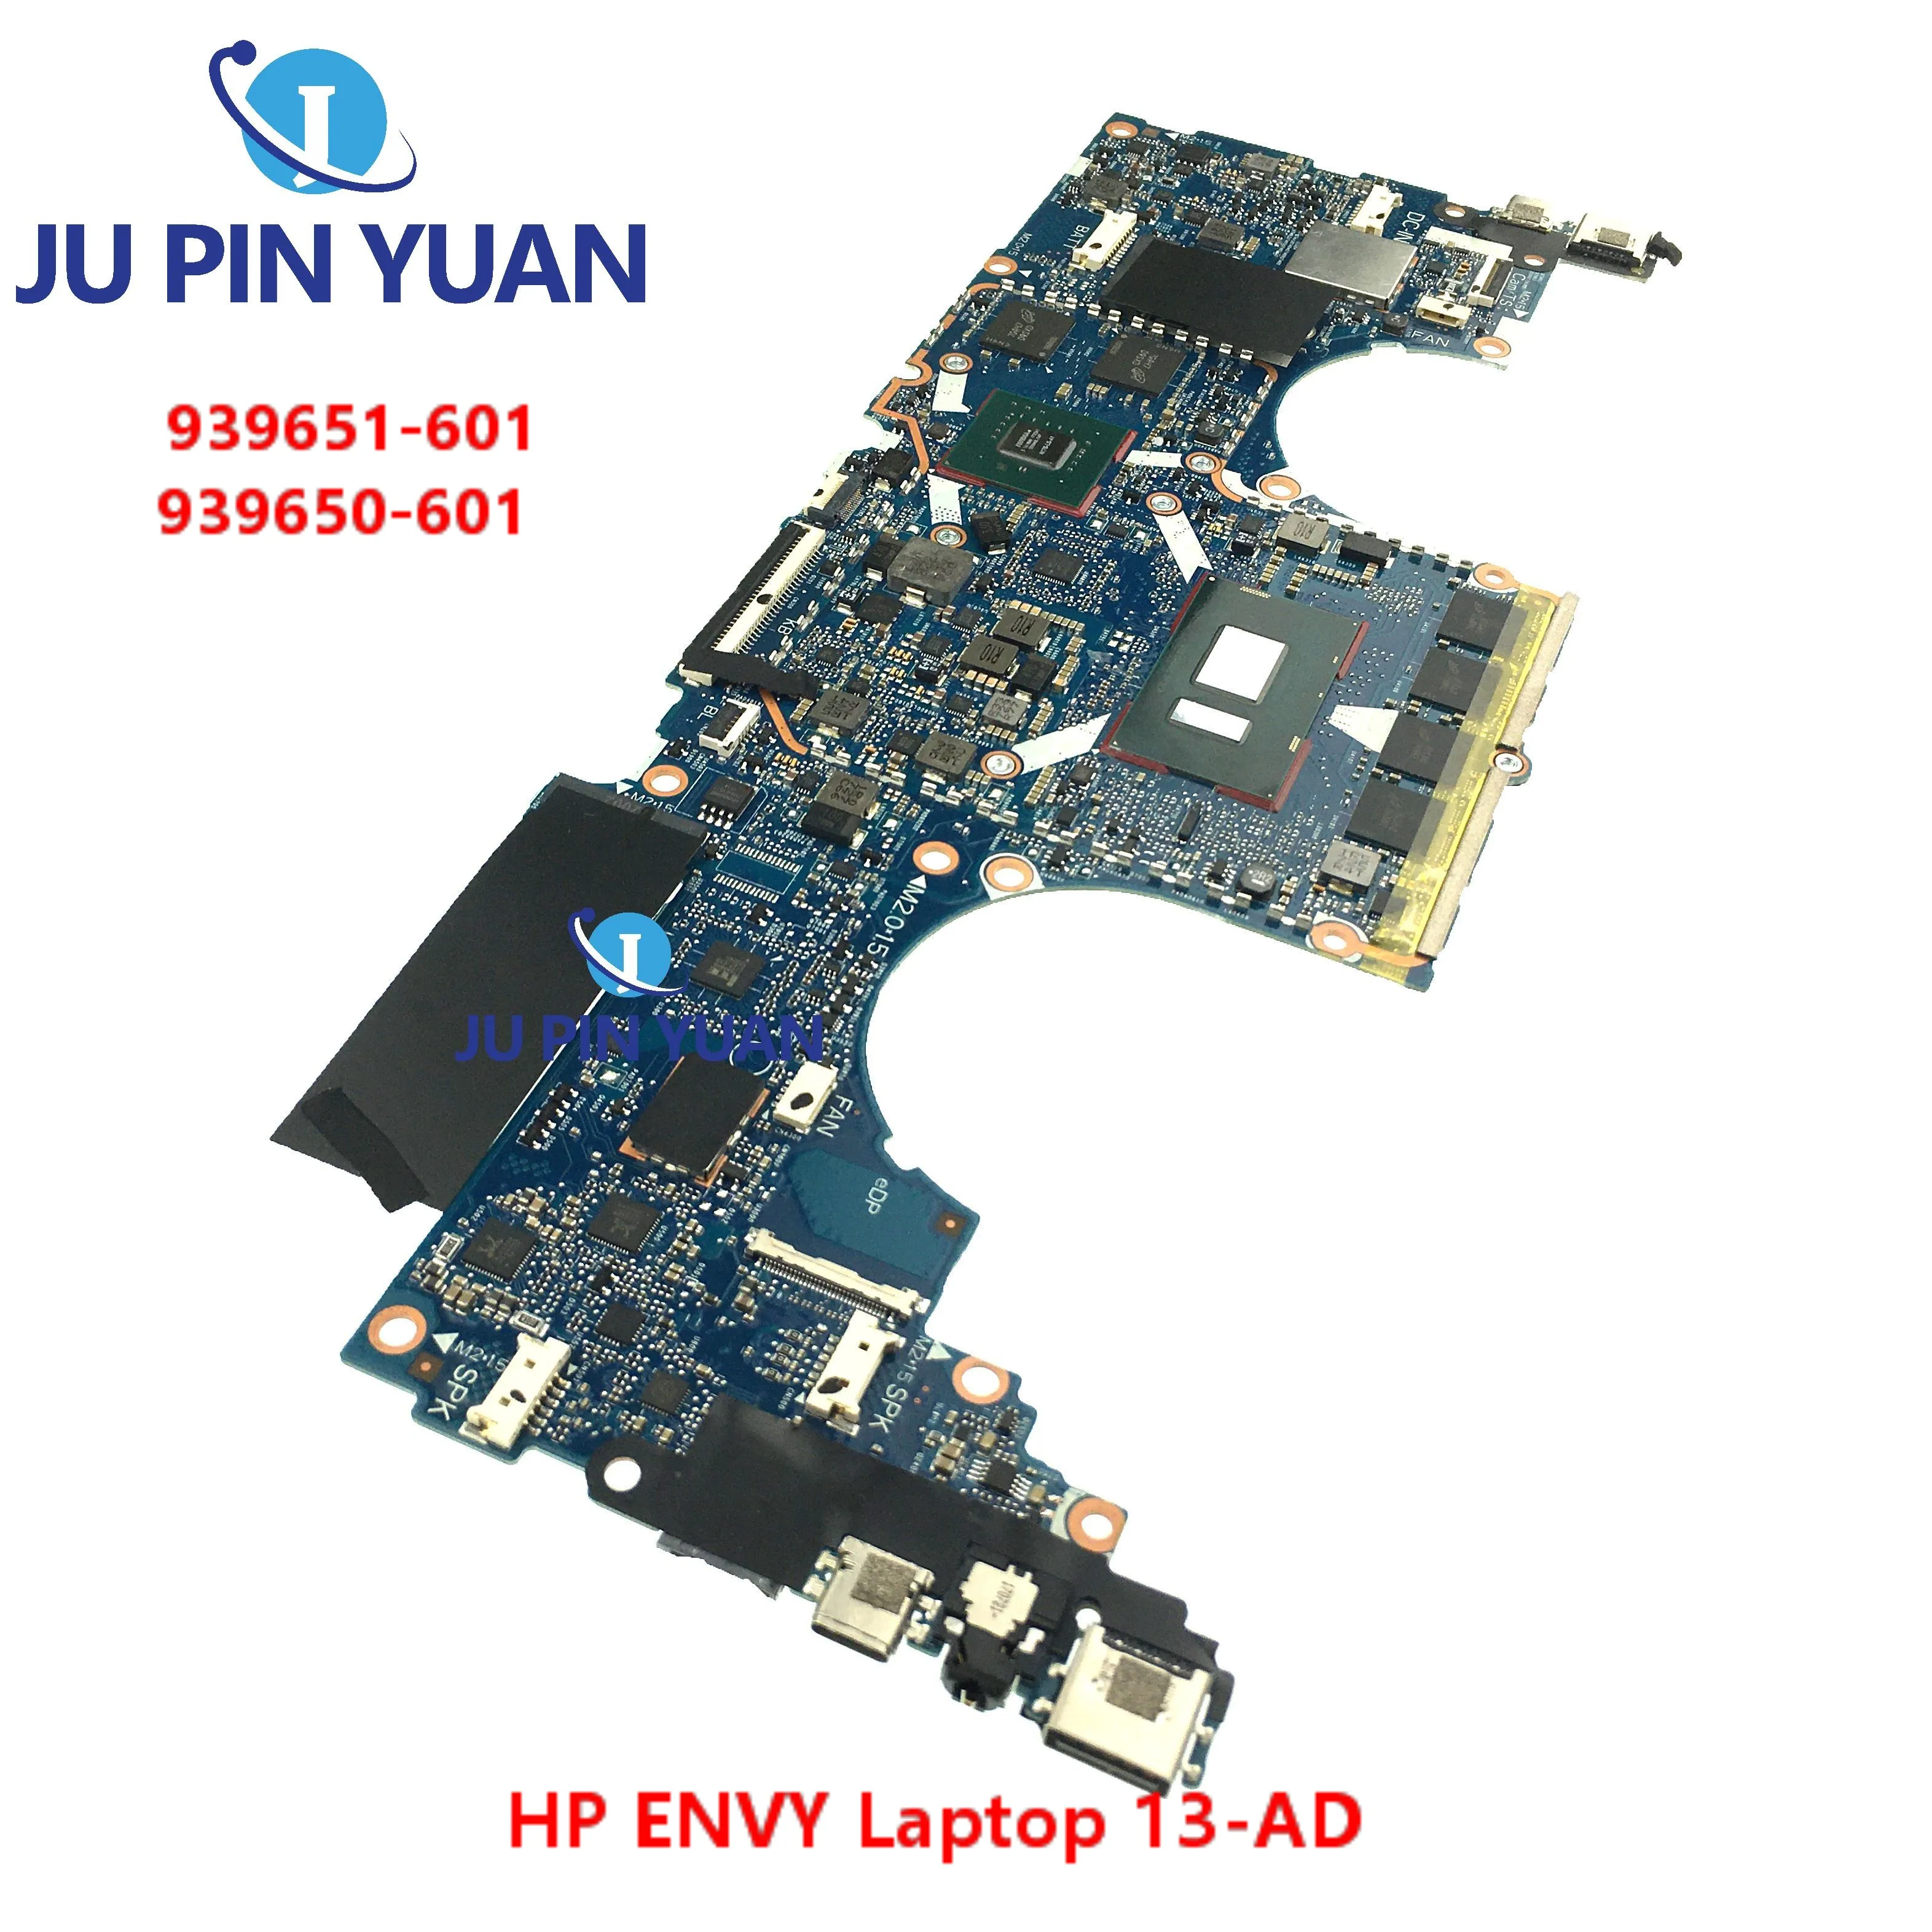 

939651-601 939650-601 For HP ENVY Laptop 13-AD Motherboard 6050A2926101-MB-A01 939650-001 939651-001 Full Tested